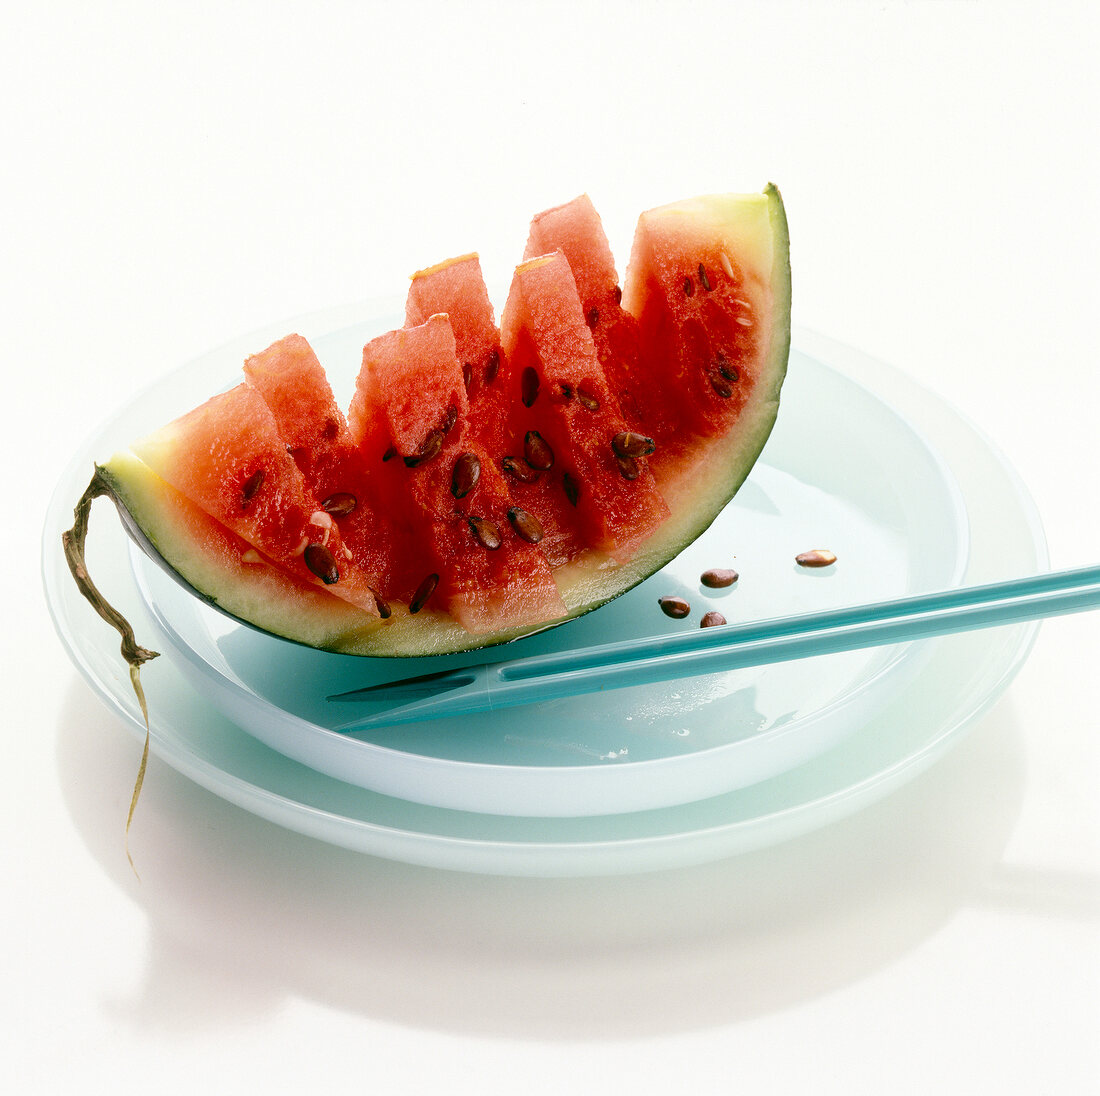 Slices of watermelon with rind on serving plate